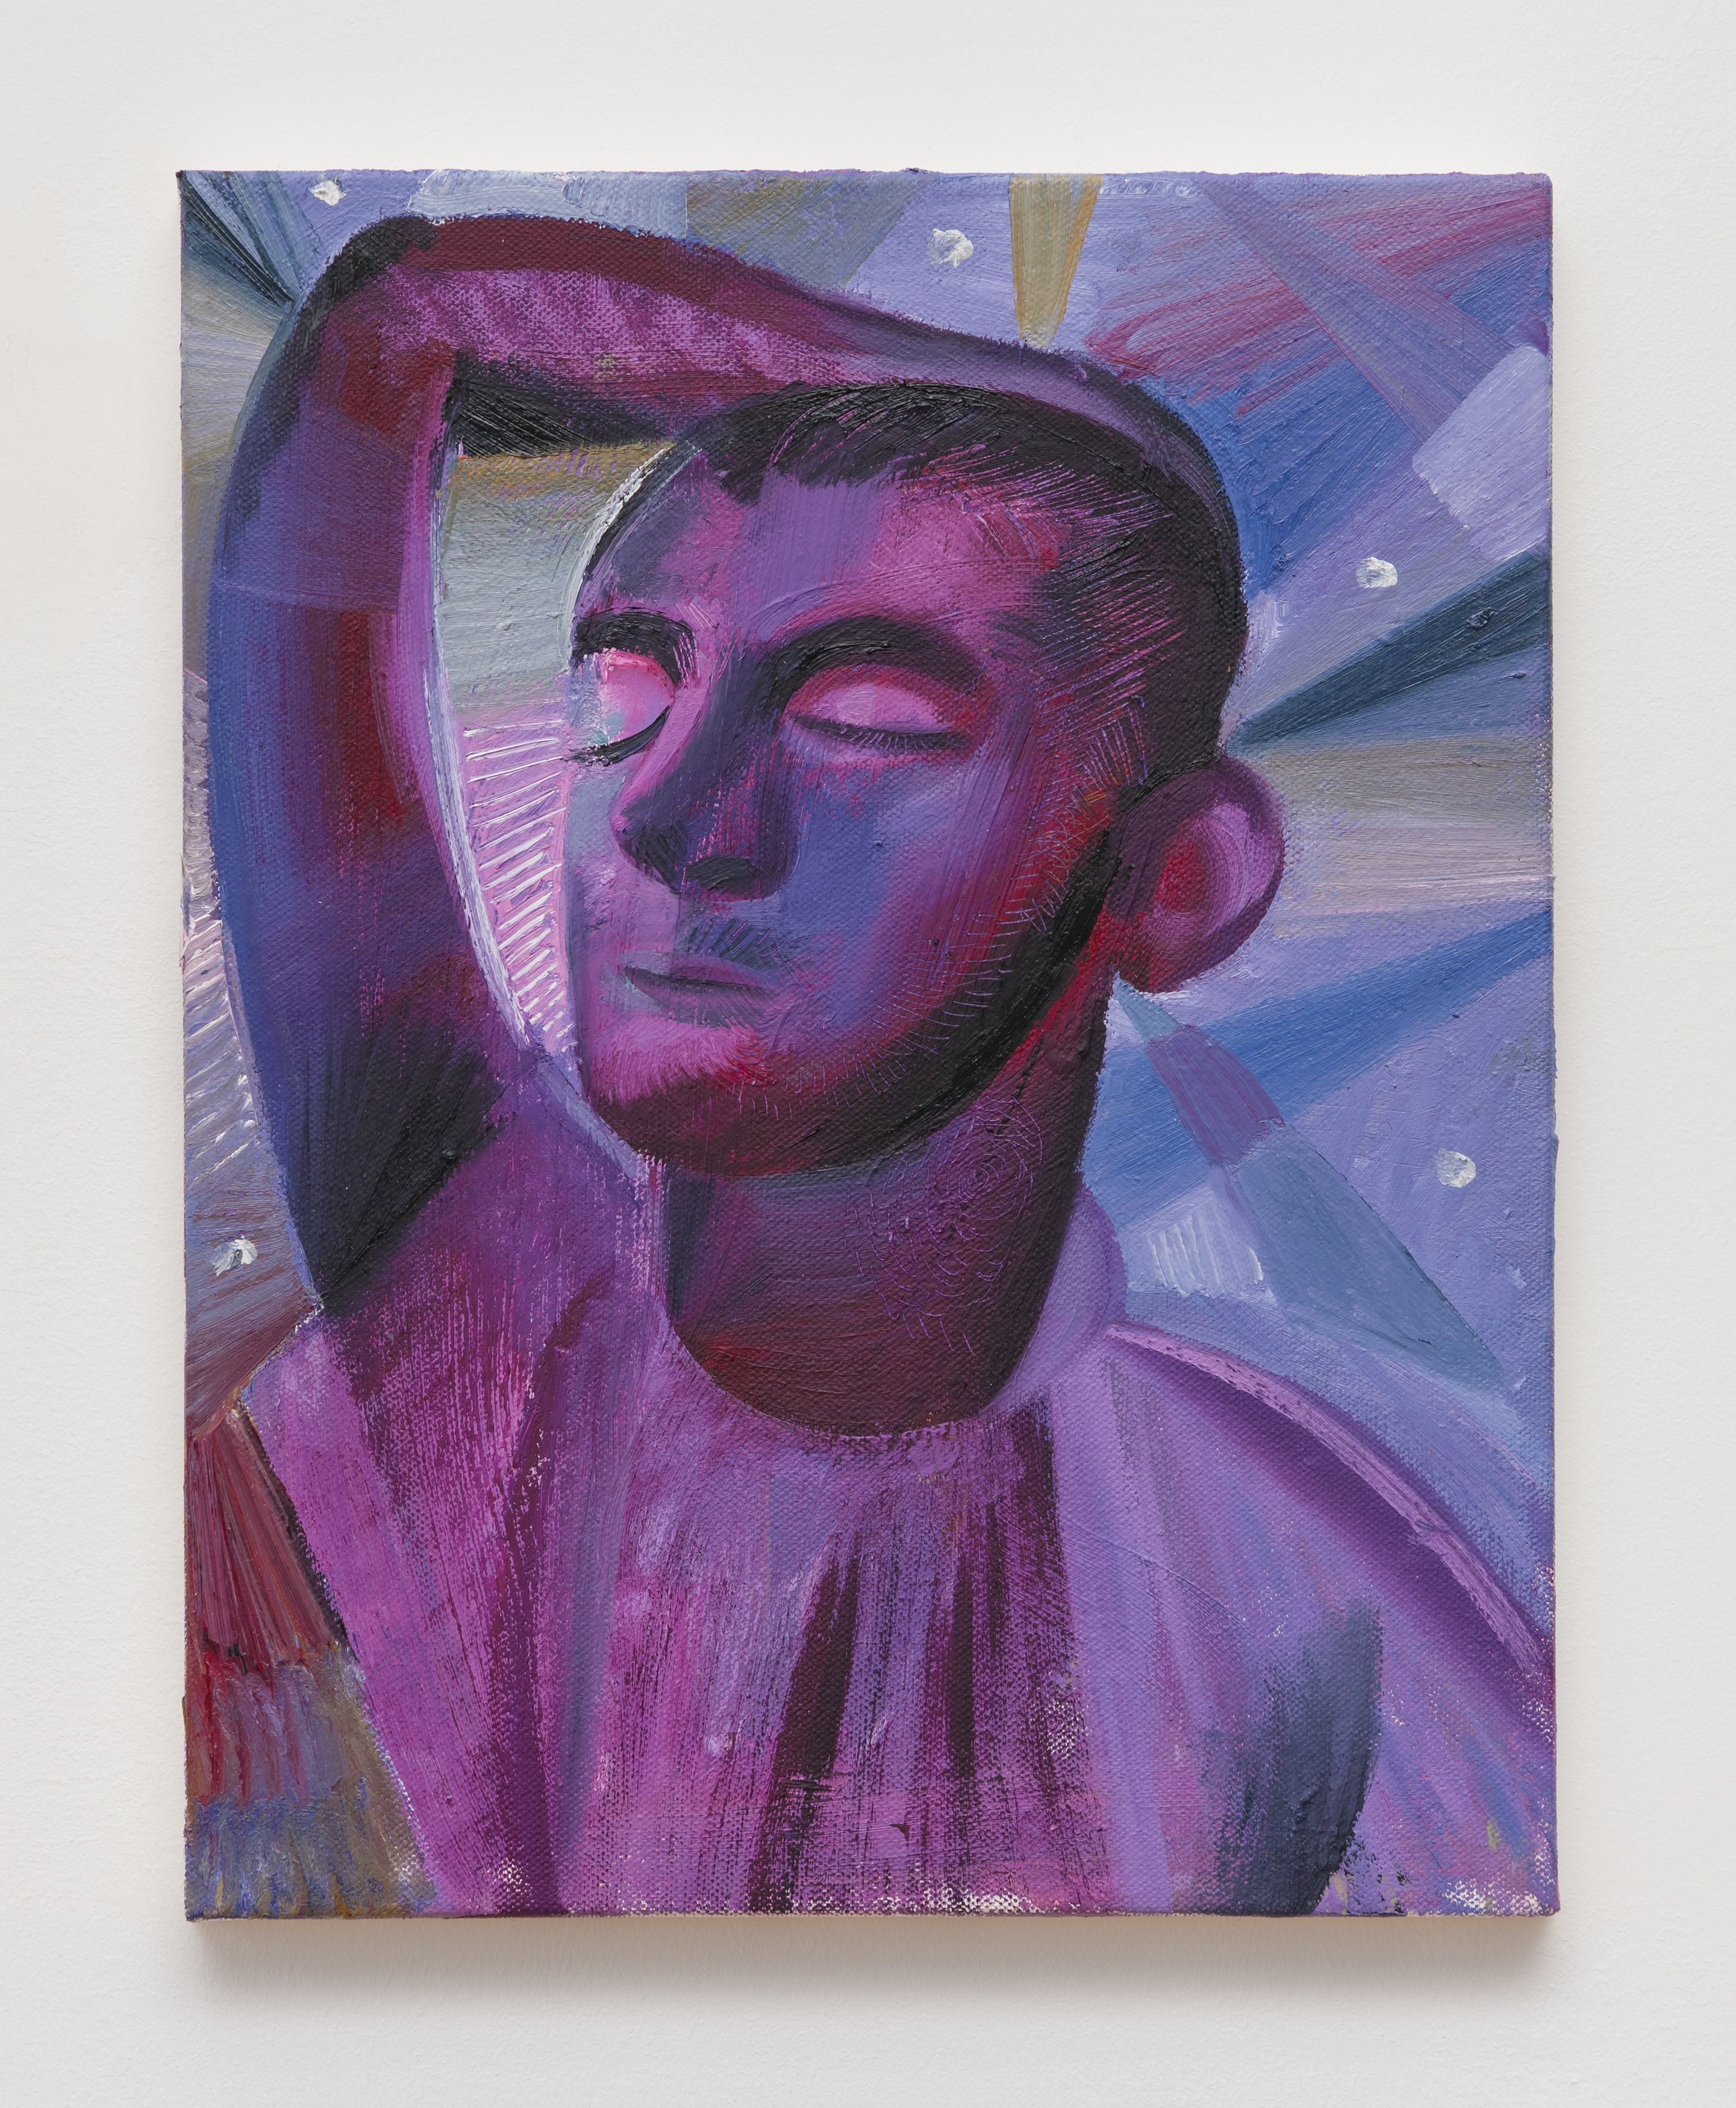 Louis Fratino, Tristan dancing, purple lights, 2018, oil on canvas, 14 x 11 in. (35.56 x 27.94 cm.)